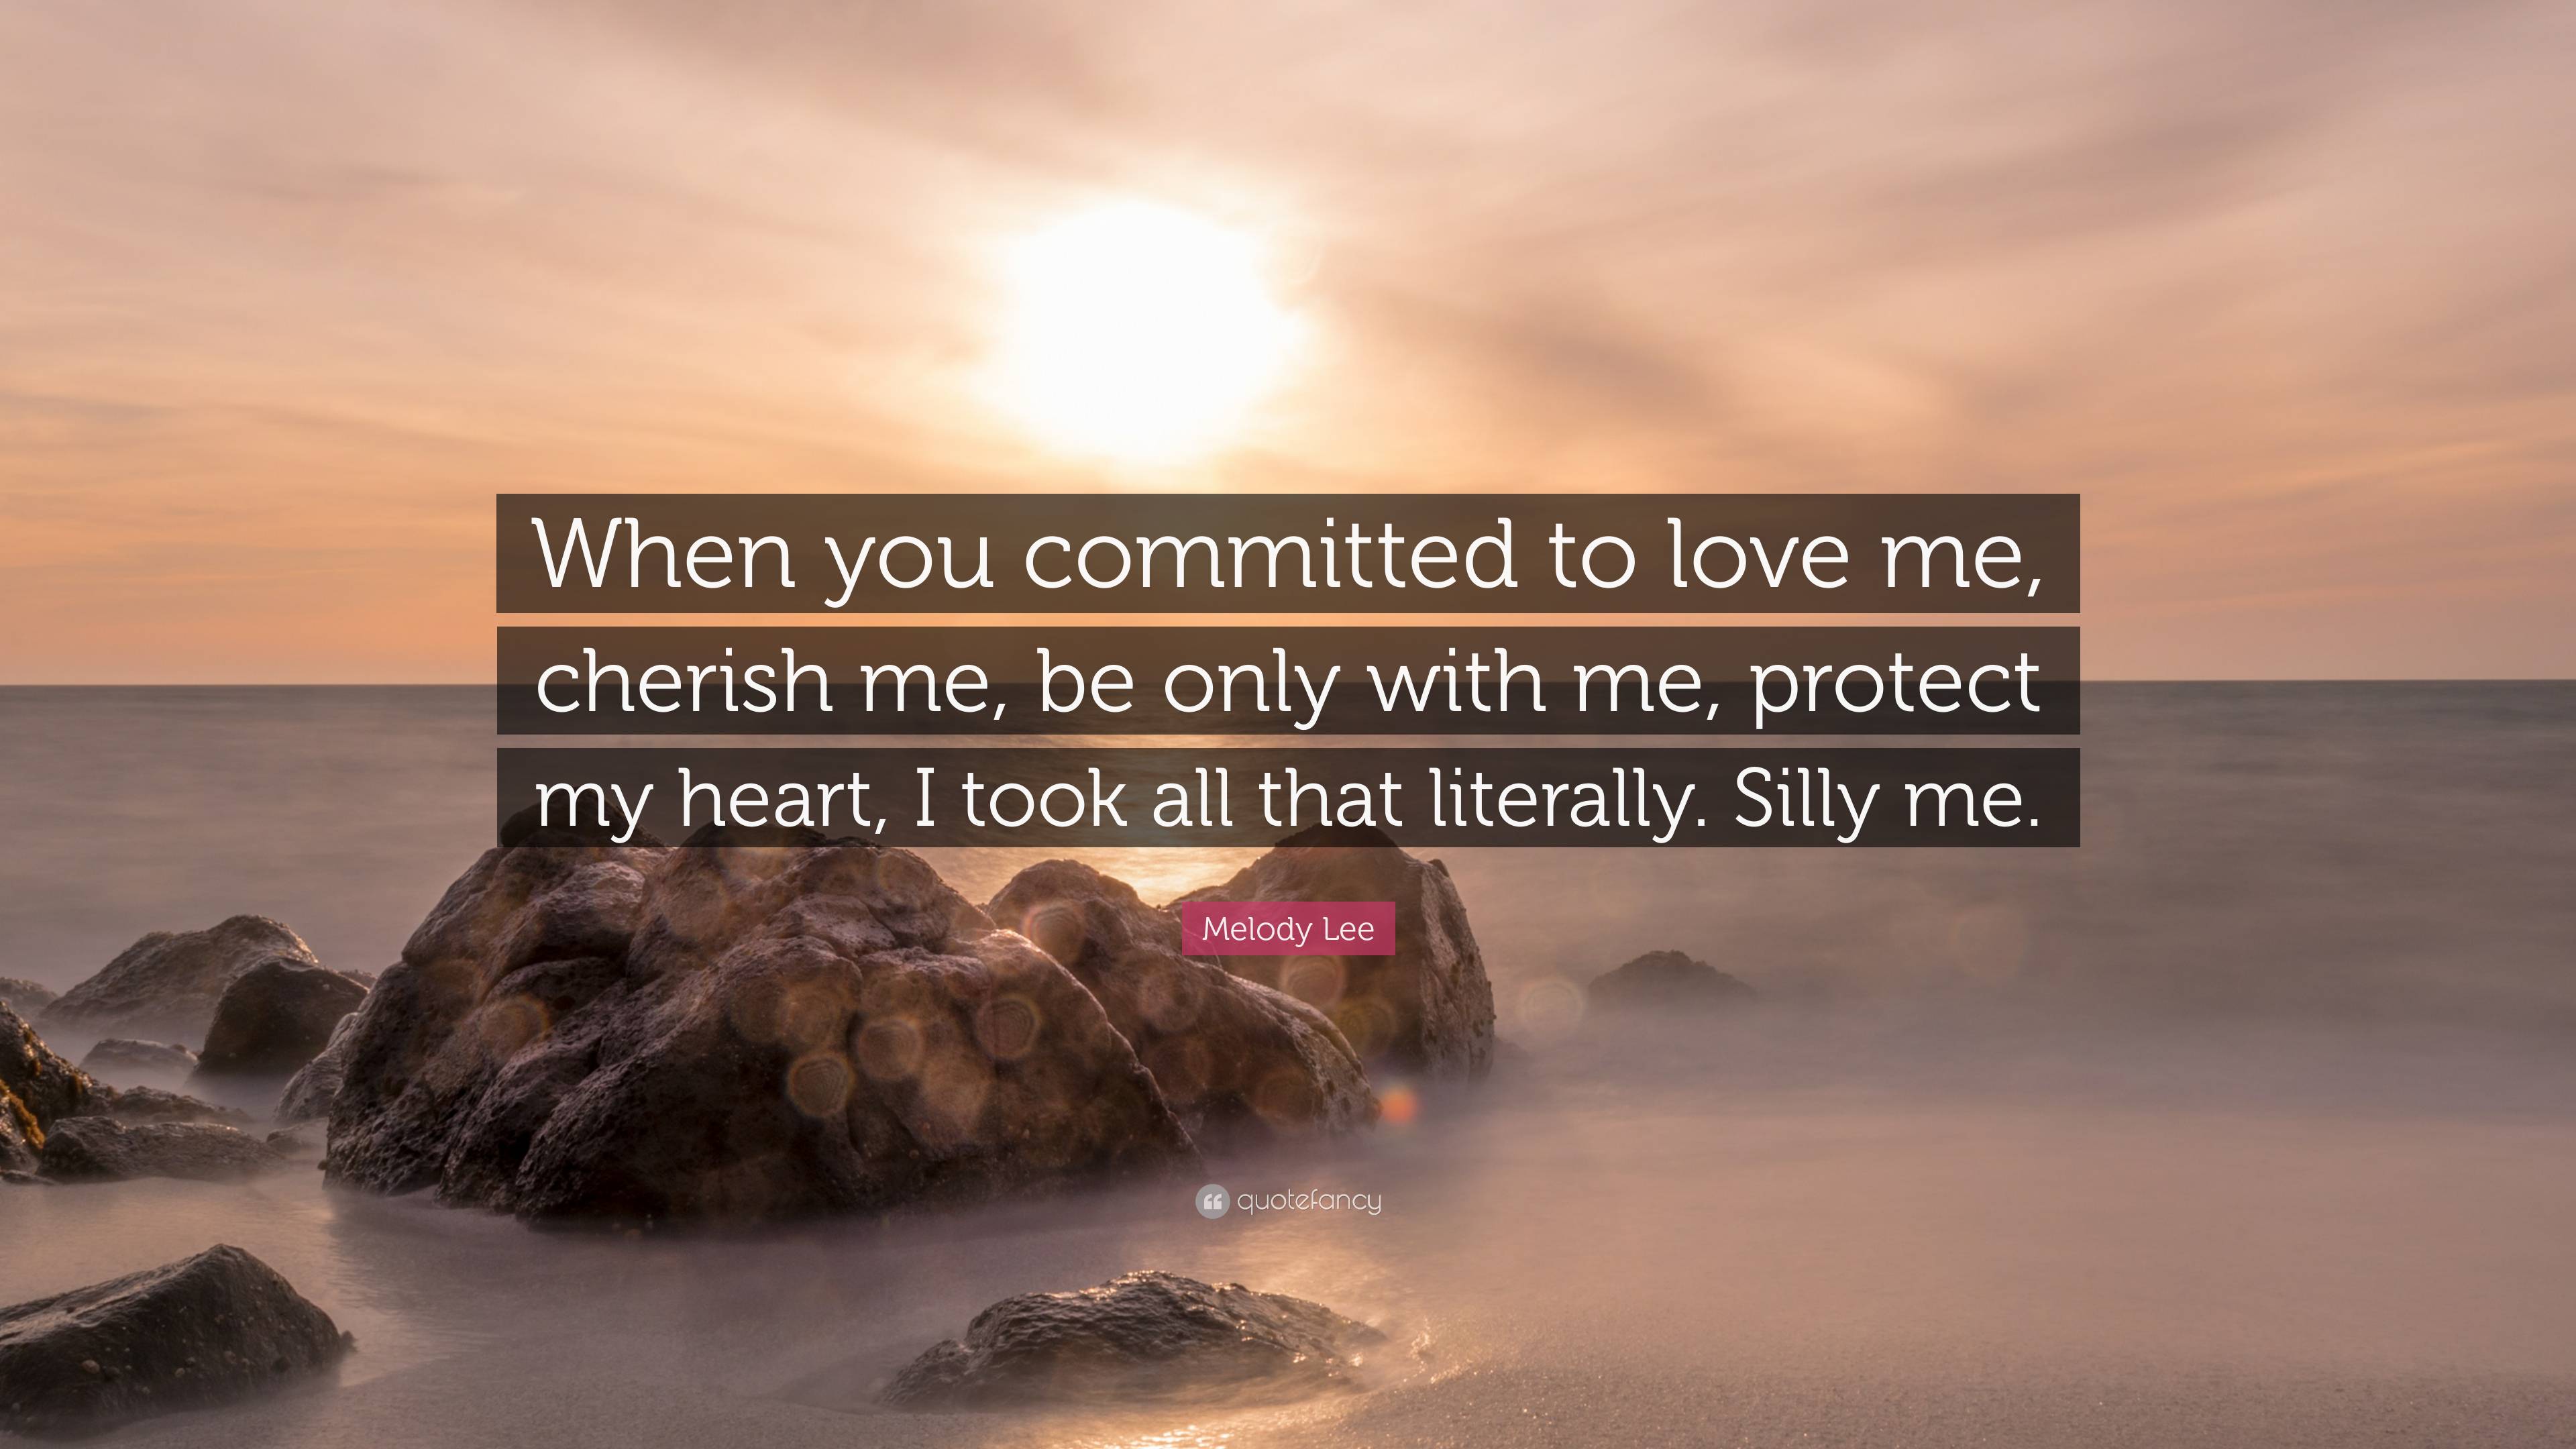 Melody Lee Quote: “When you committed to love me, cherish me, be